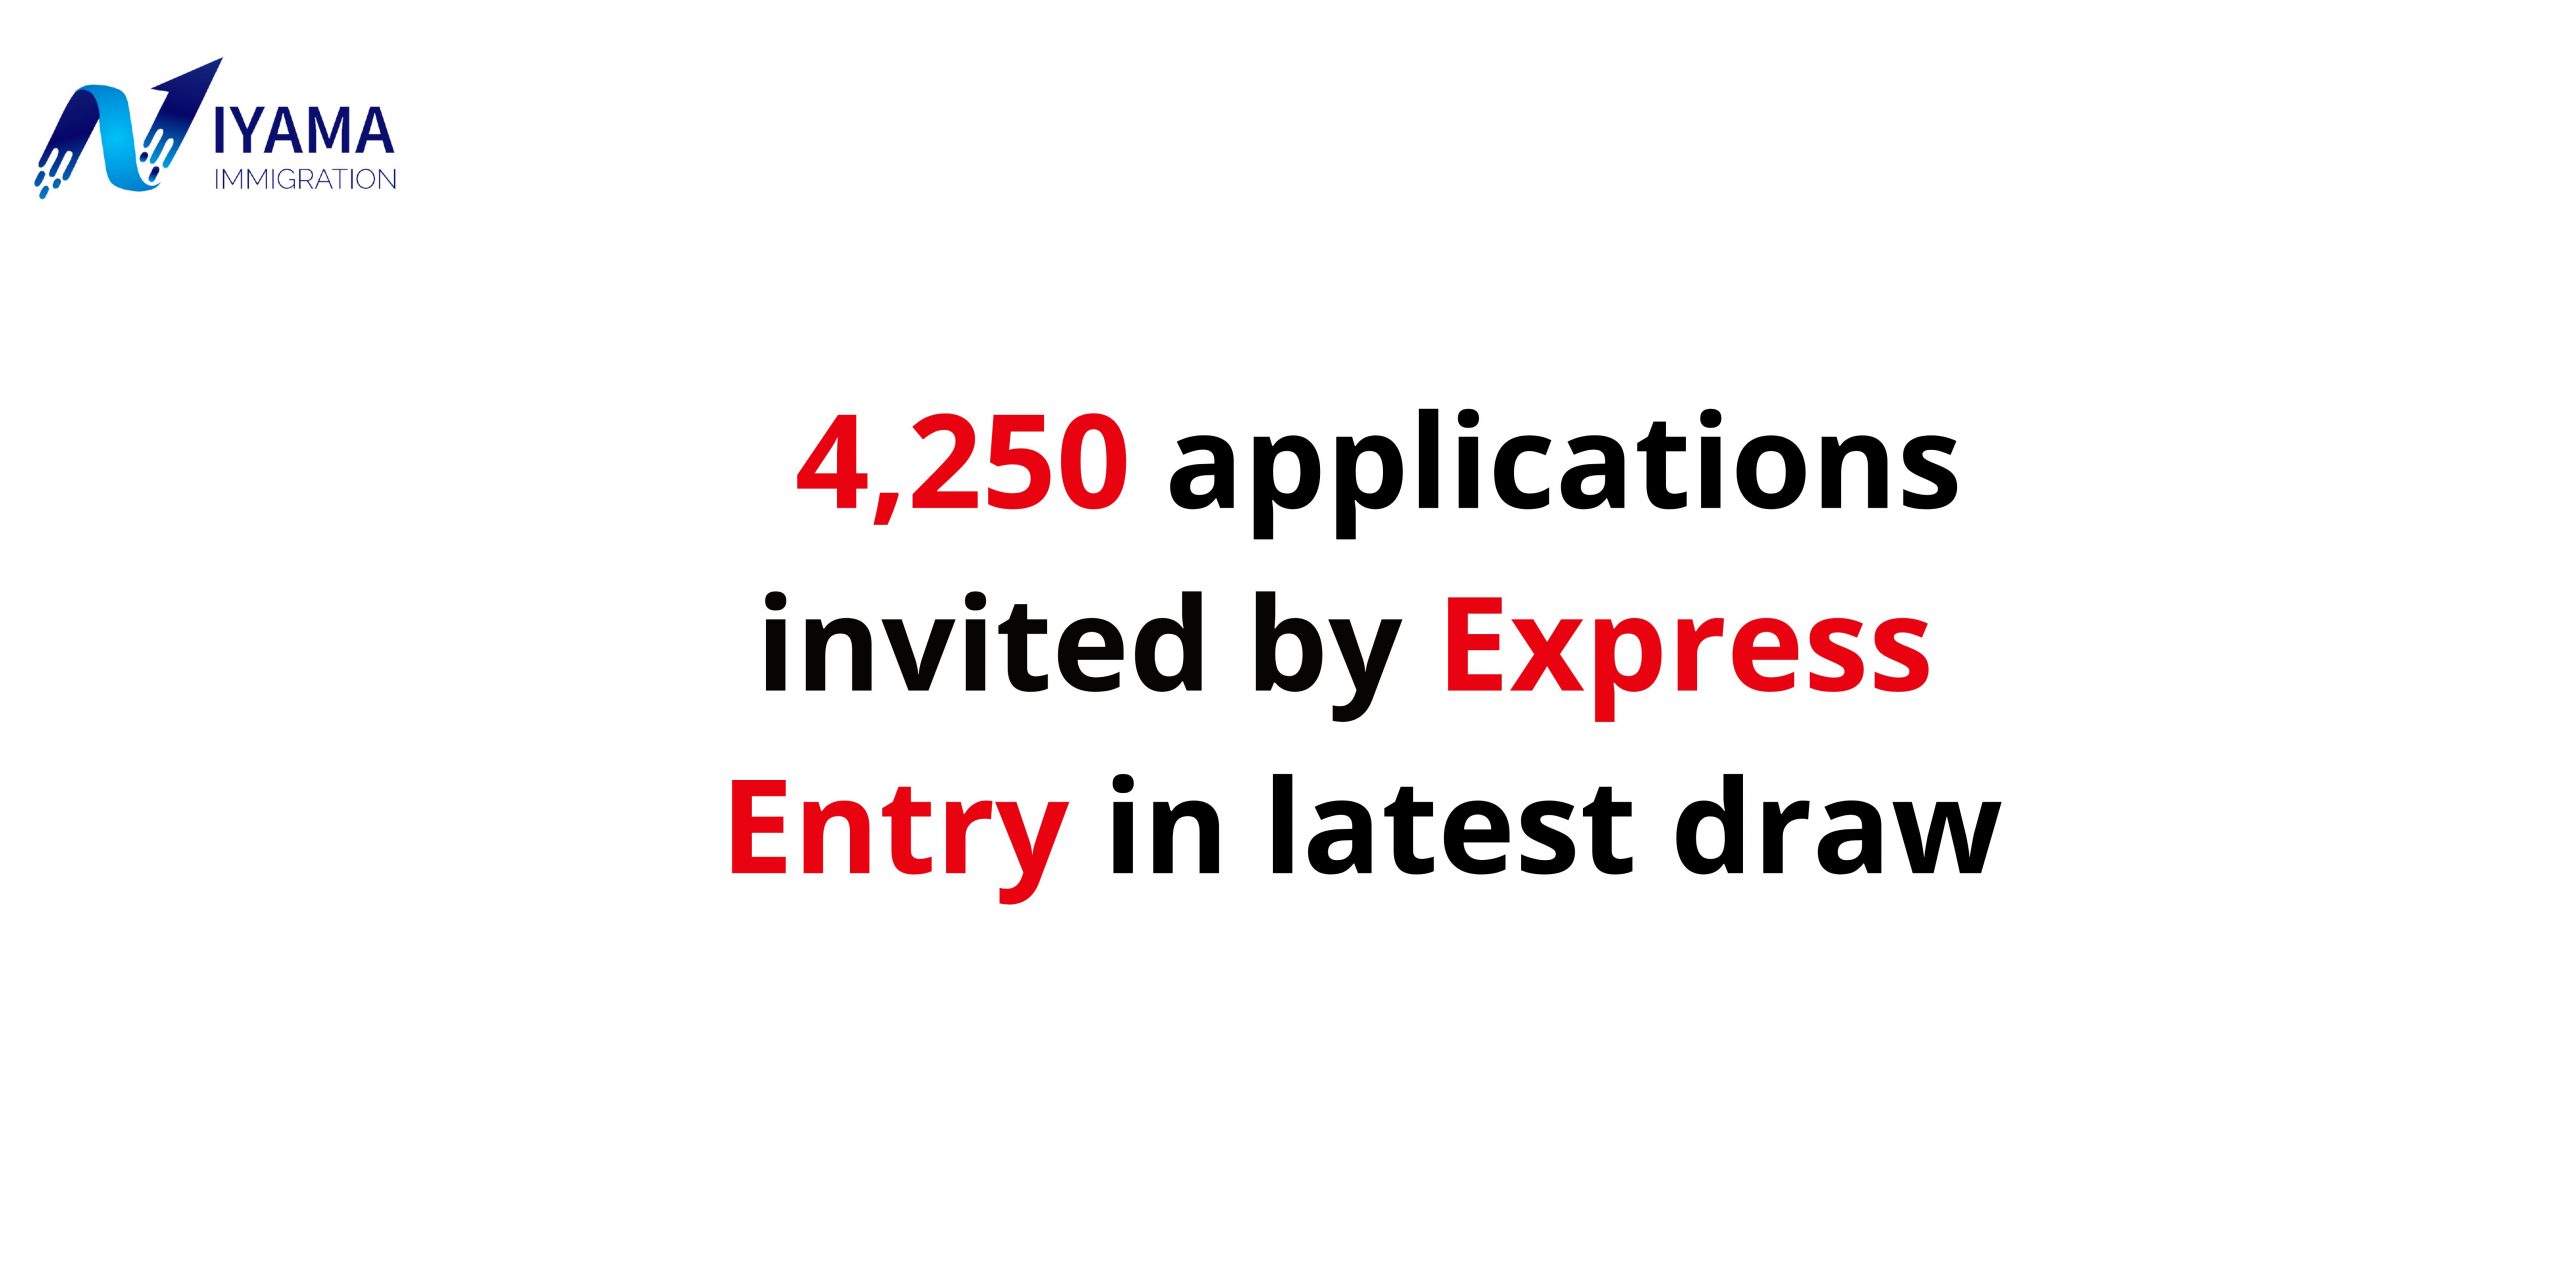 Express Entry Draw: 4,250 New Applications Invited